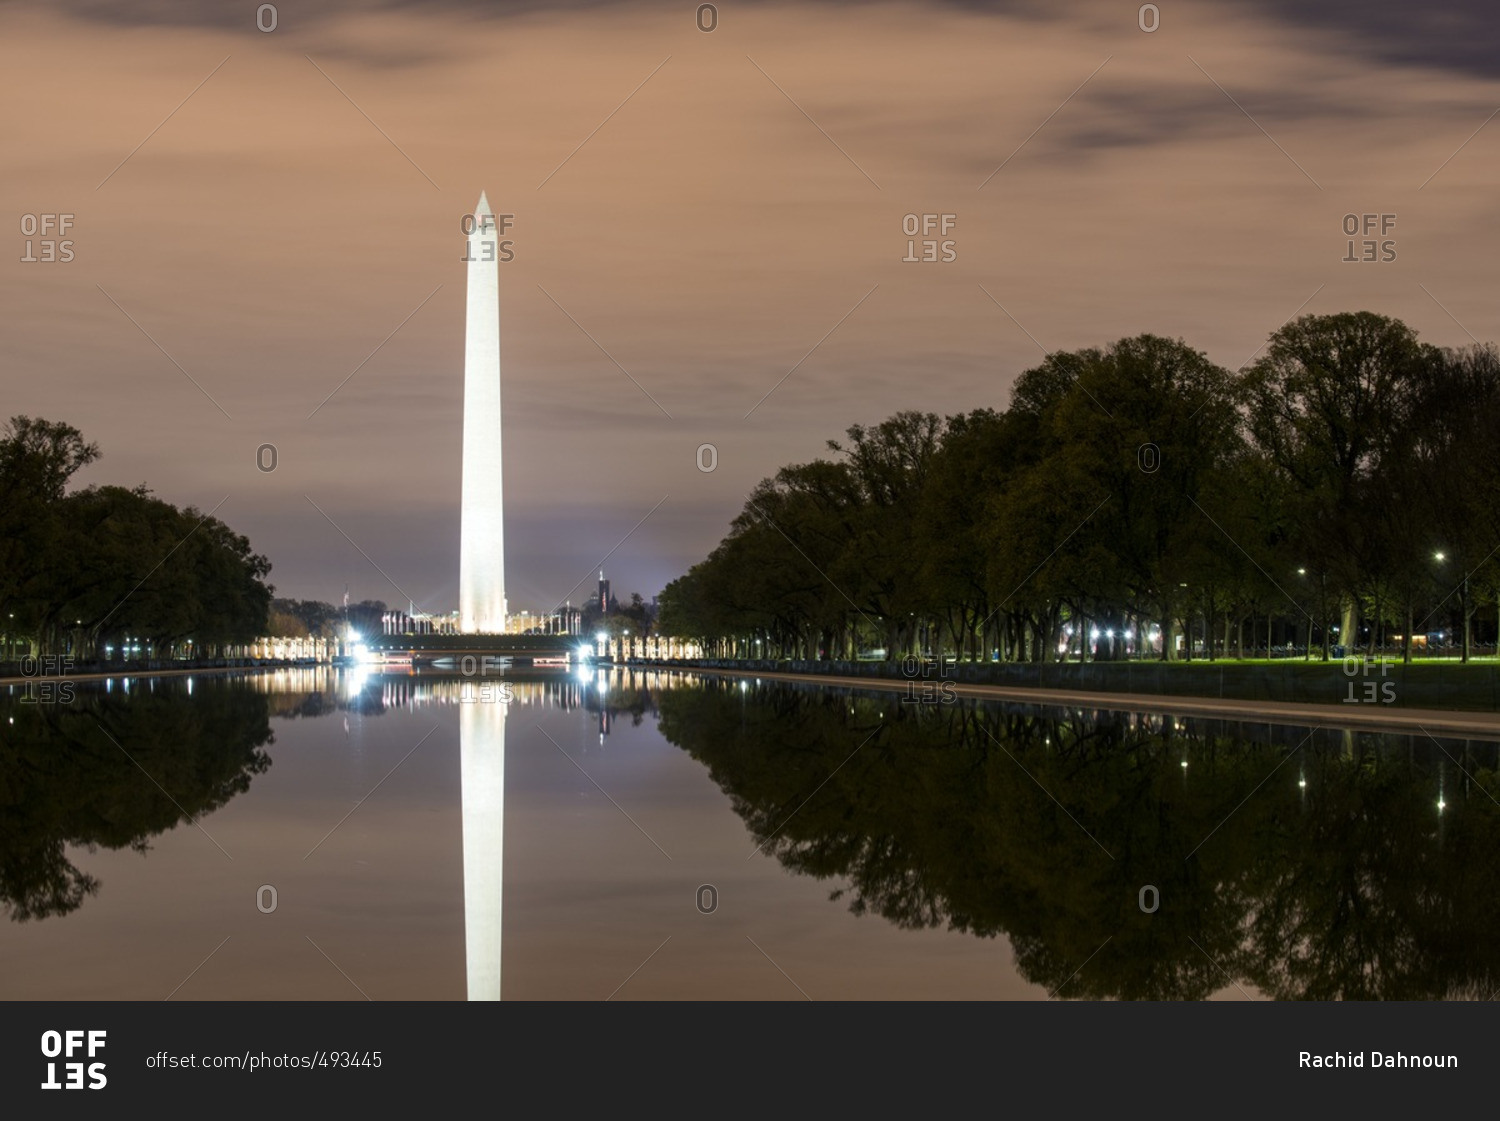 The Lincoln Memorial Reflecting Pool reflects the Washington Monument at night in the National Mall of Washington DC, USA.